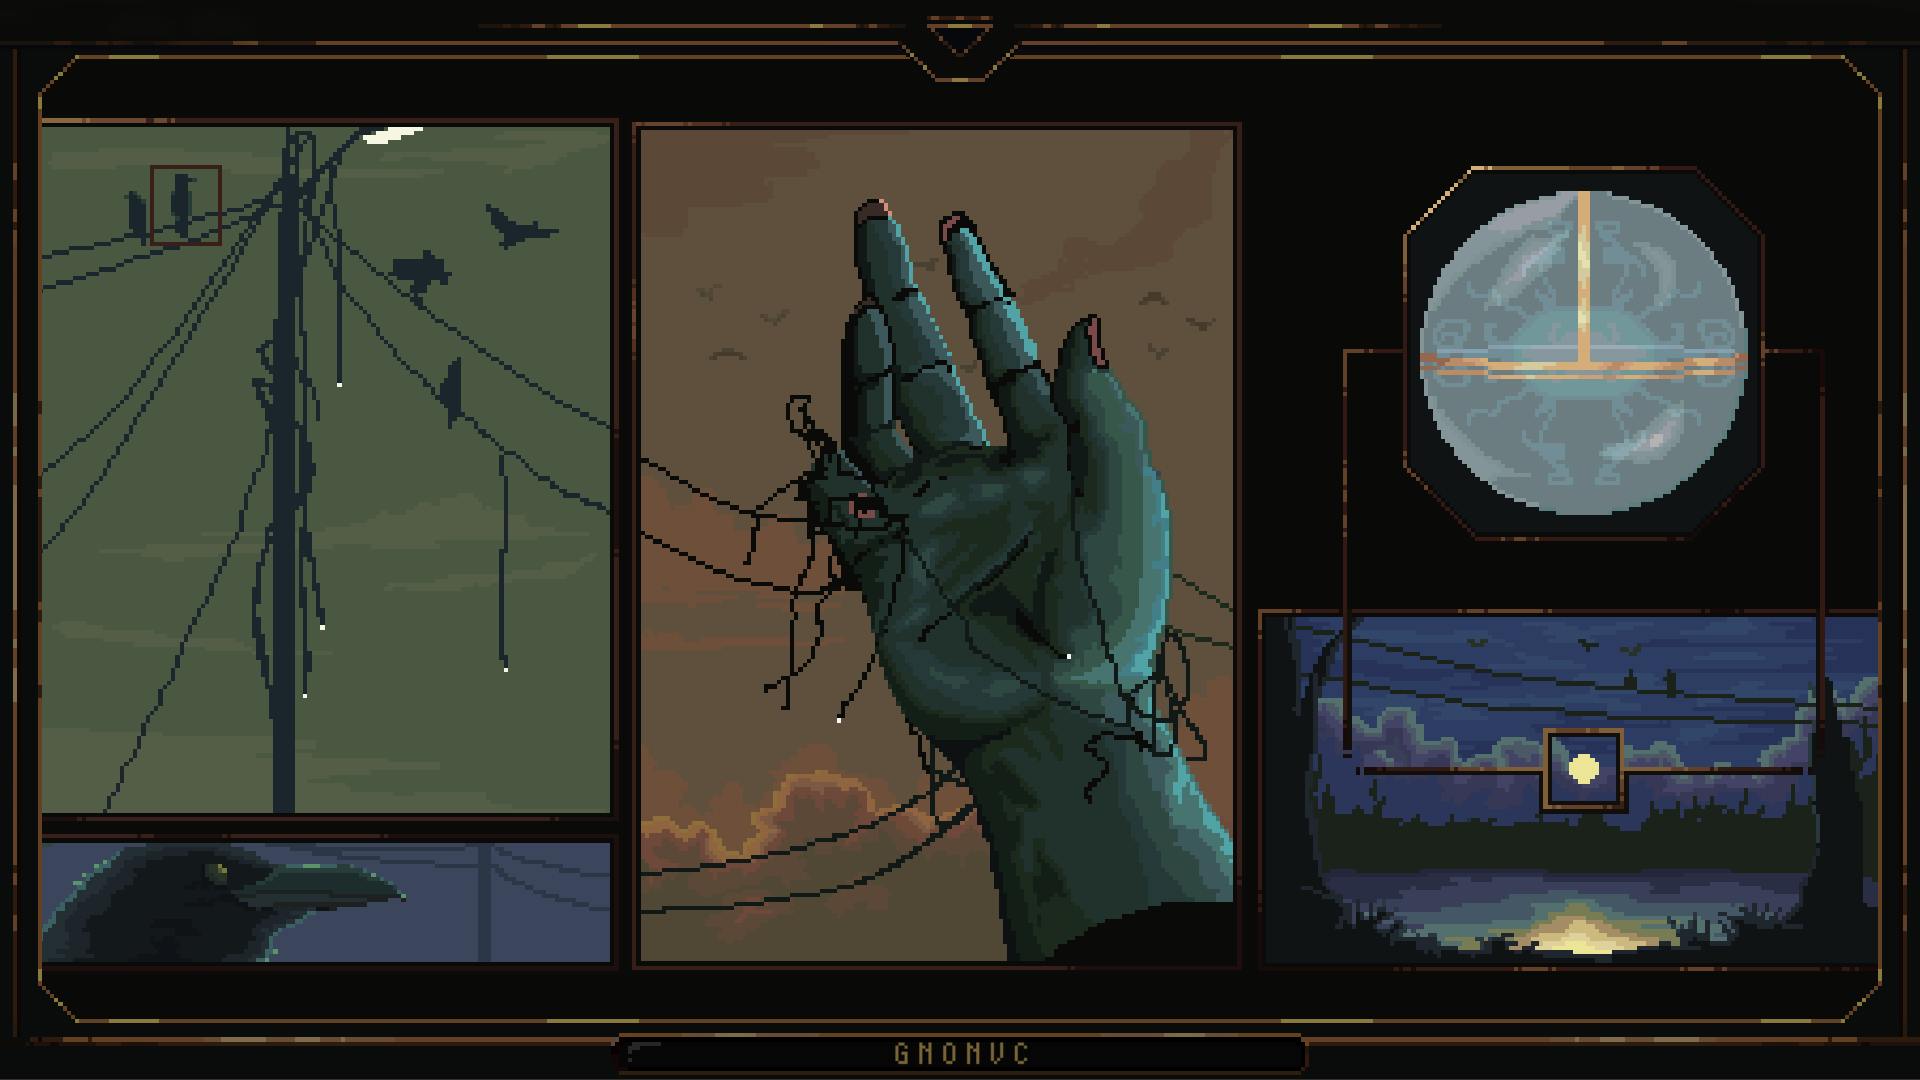 Several images next to each other, like a comic book. One is of a powerline with some crows. Beneath that is an image of a crow. Next to that is a hand covered in wire that connects to the powerline. To the right is the night sky.